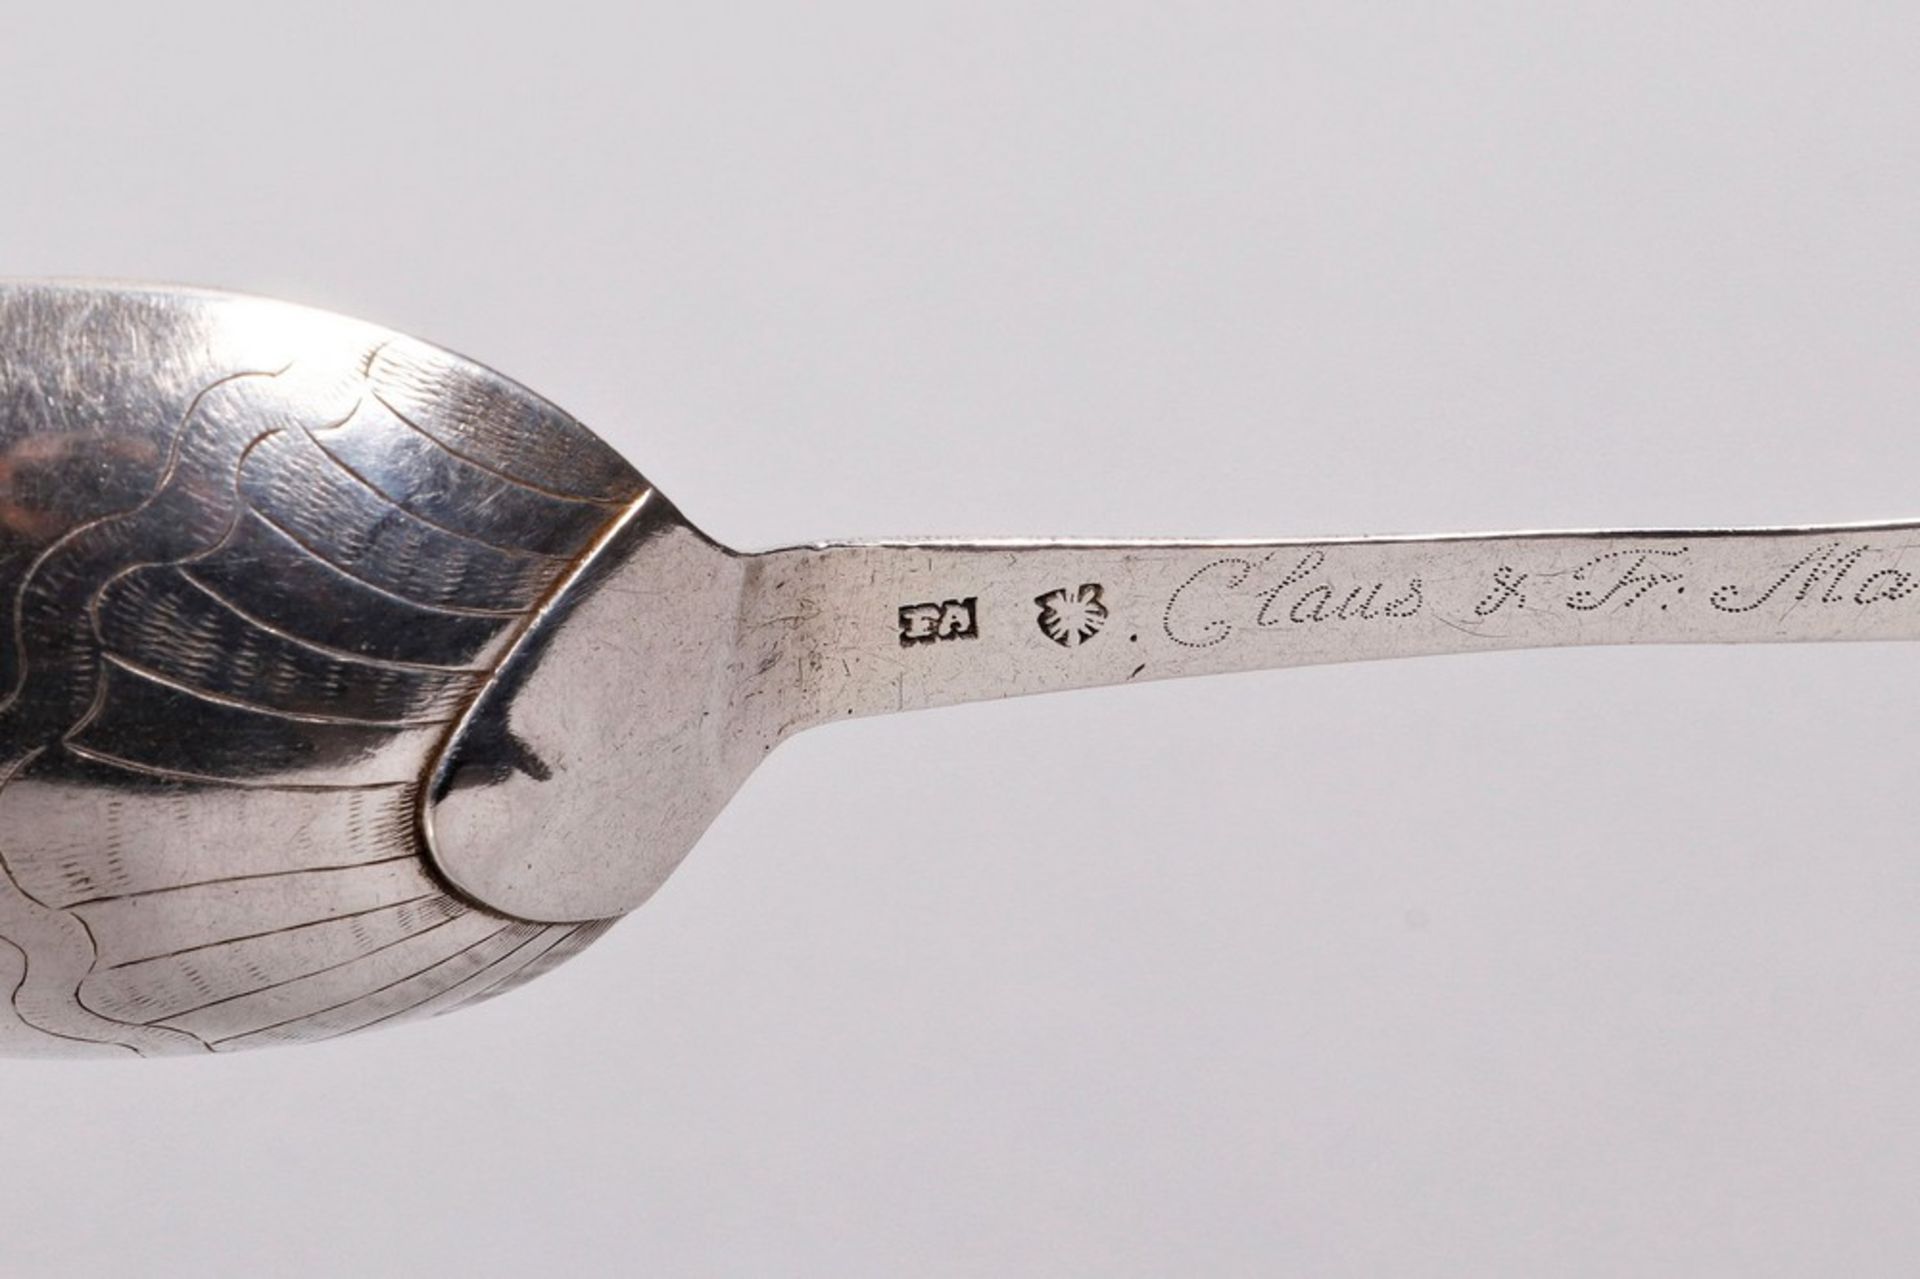 2 dining spoons, silver, including Friedrich August Heyne, Lübeck, late 18th C./1800 - Image 4 of 5